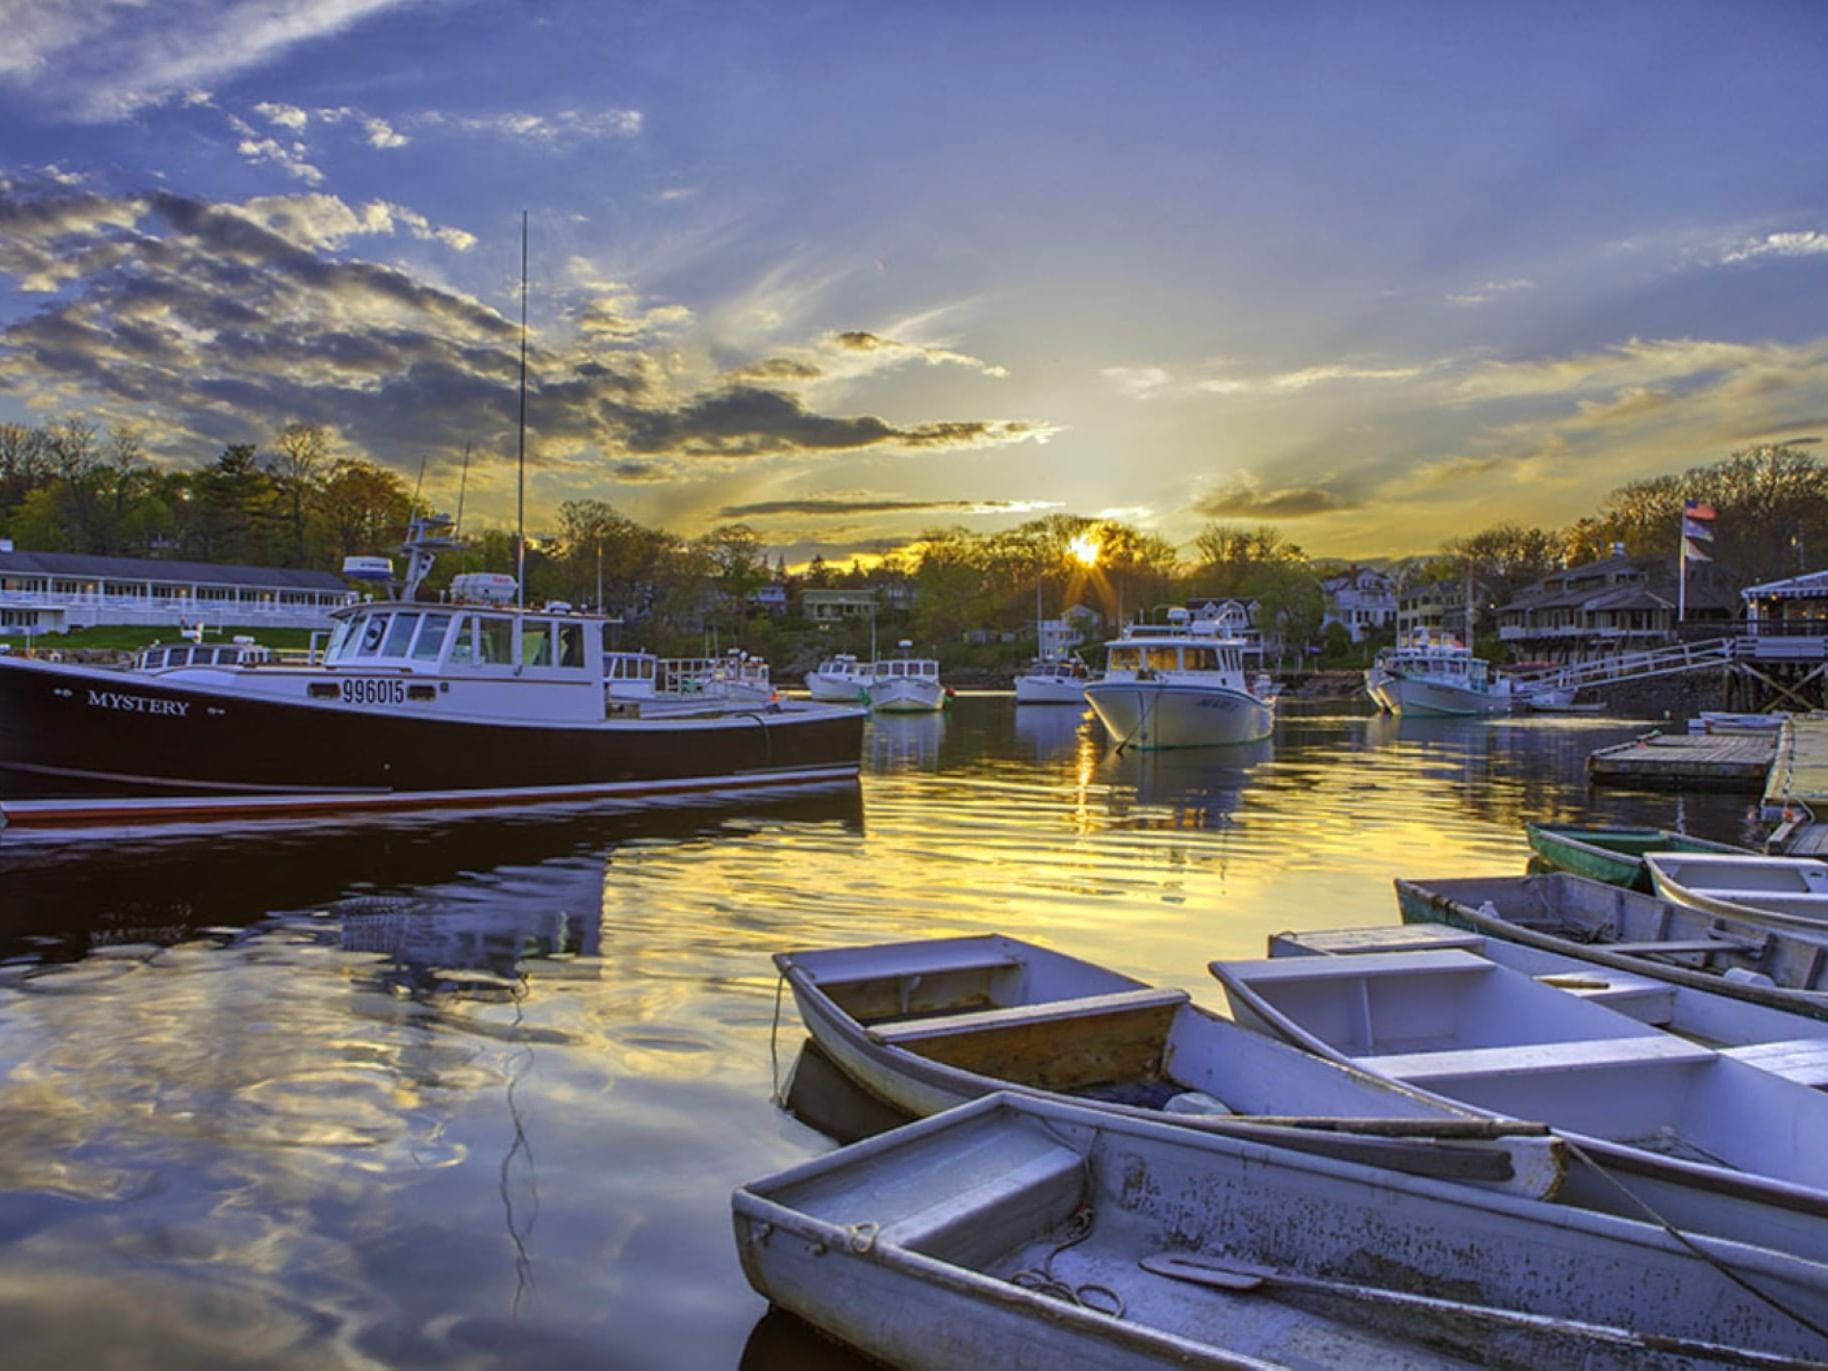 Boats dock in Perkins Cove with a scenic harbor view near Gorges Grant Hotel